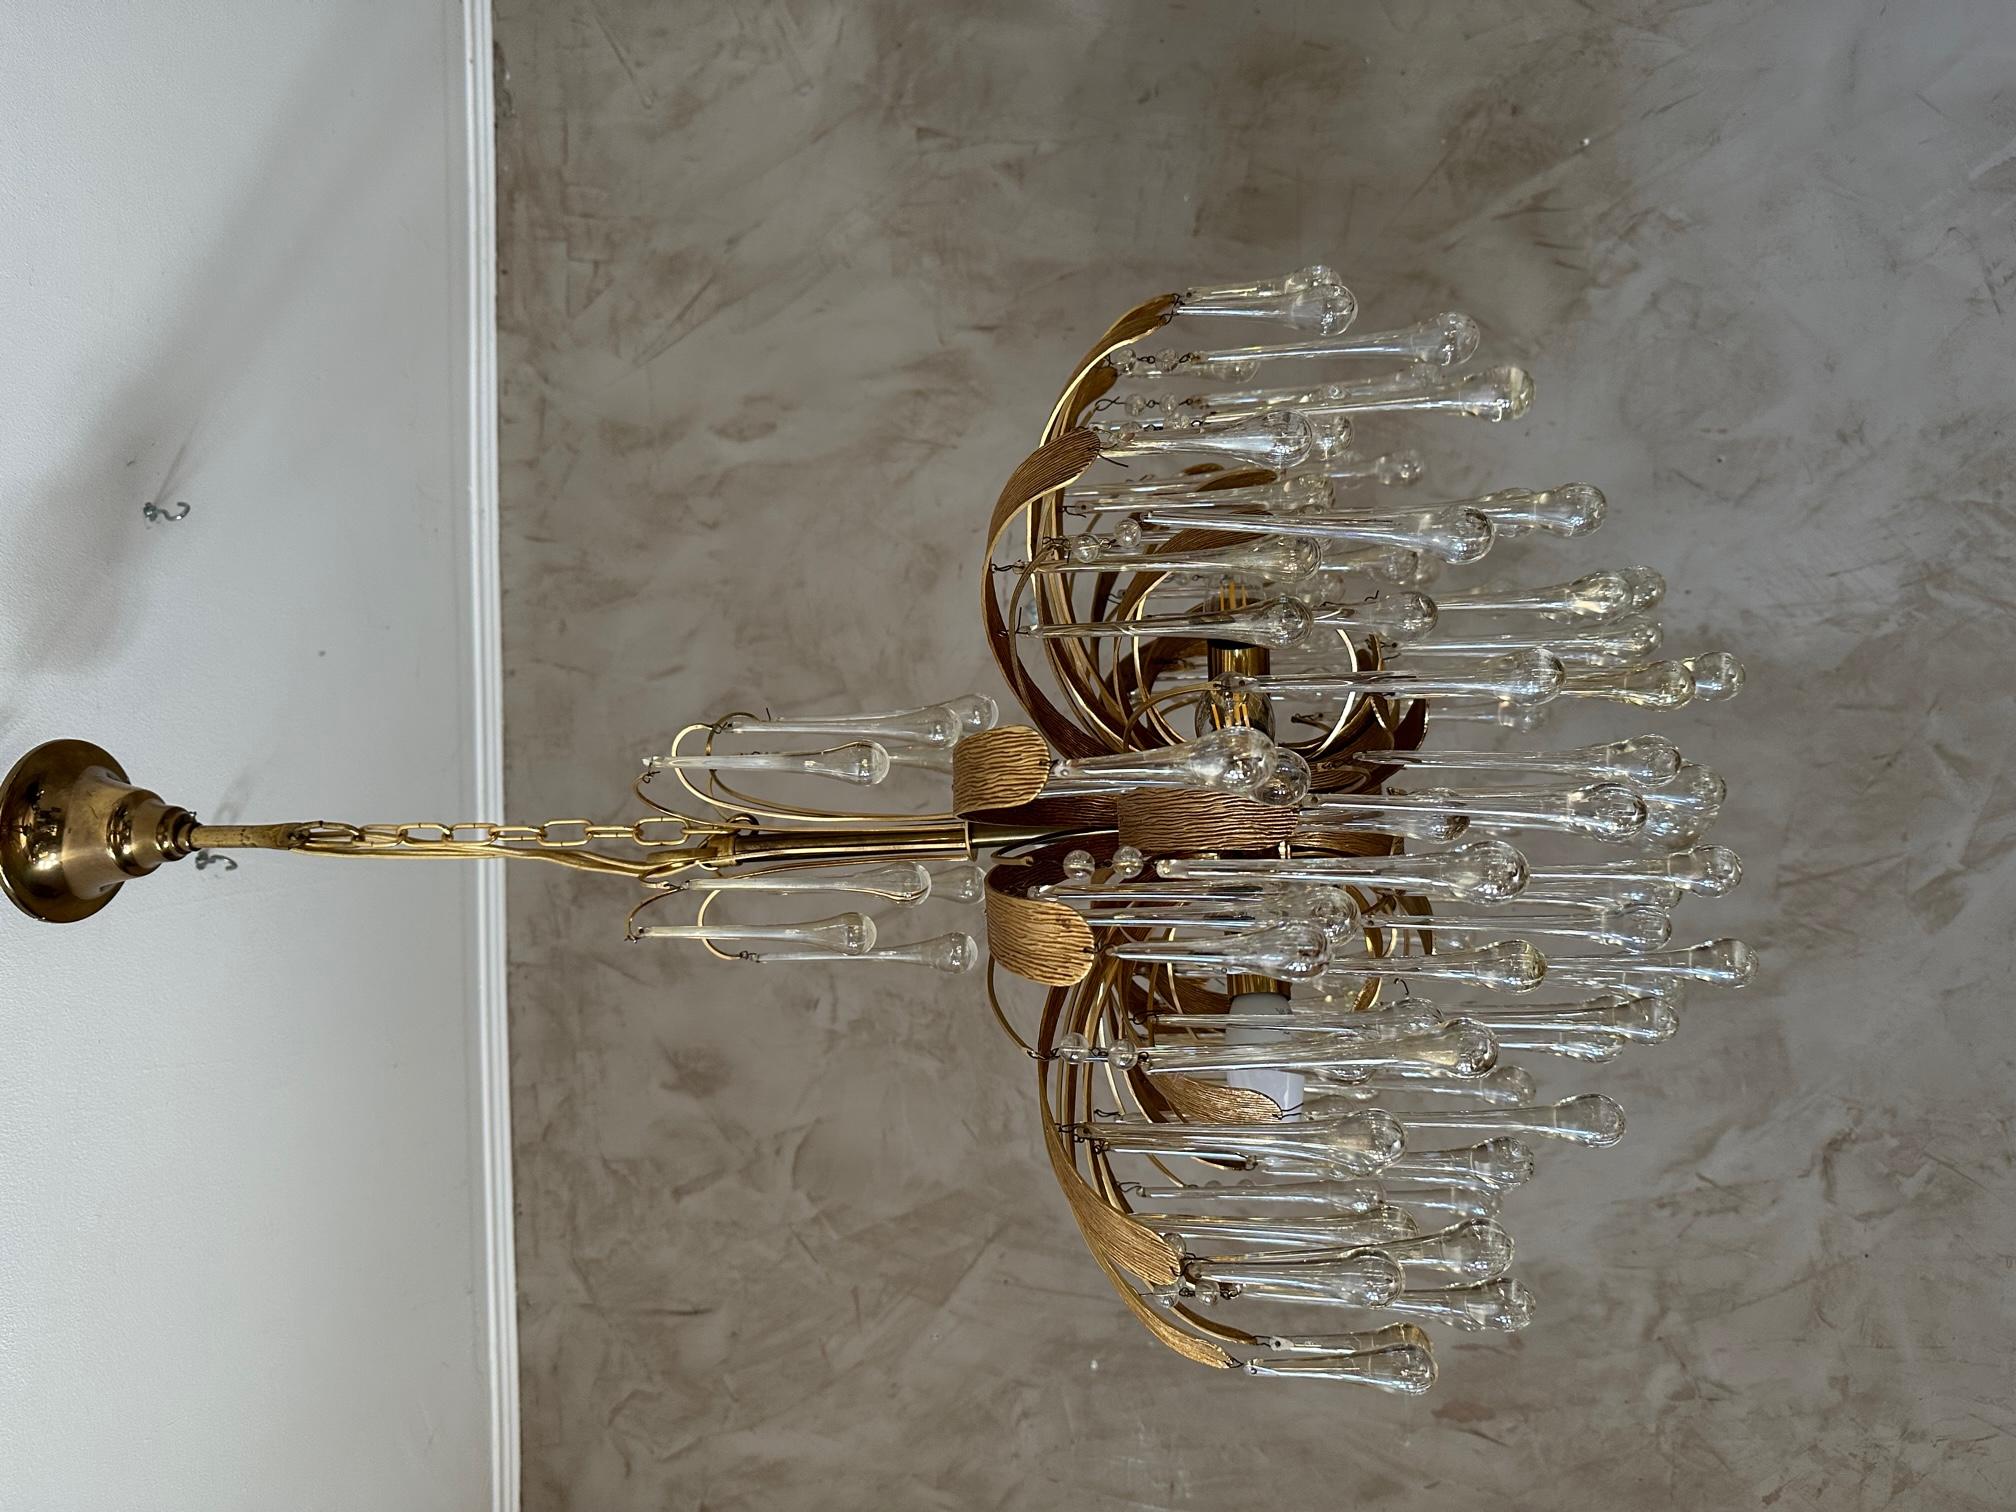 Magnificent gilded brass chandelier from Palwa (Germany) from the 70s.
This stunning chandelier features a gold brass Sputnik, gold textured leaves forming a large flower and elongated Murano glass drops beautifully arranged on several levels, like